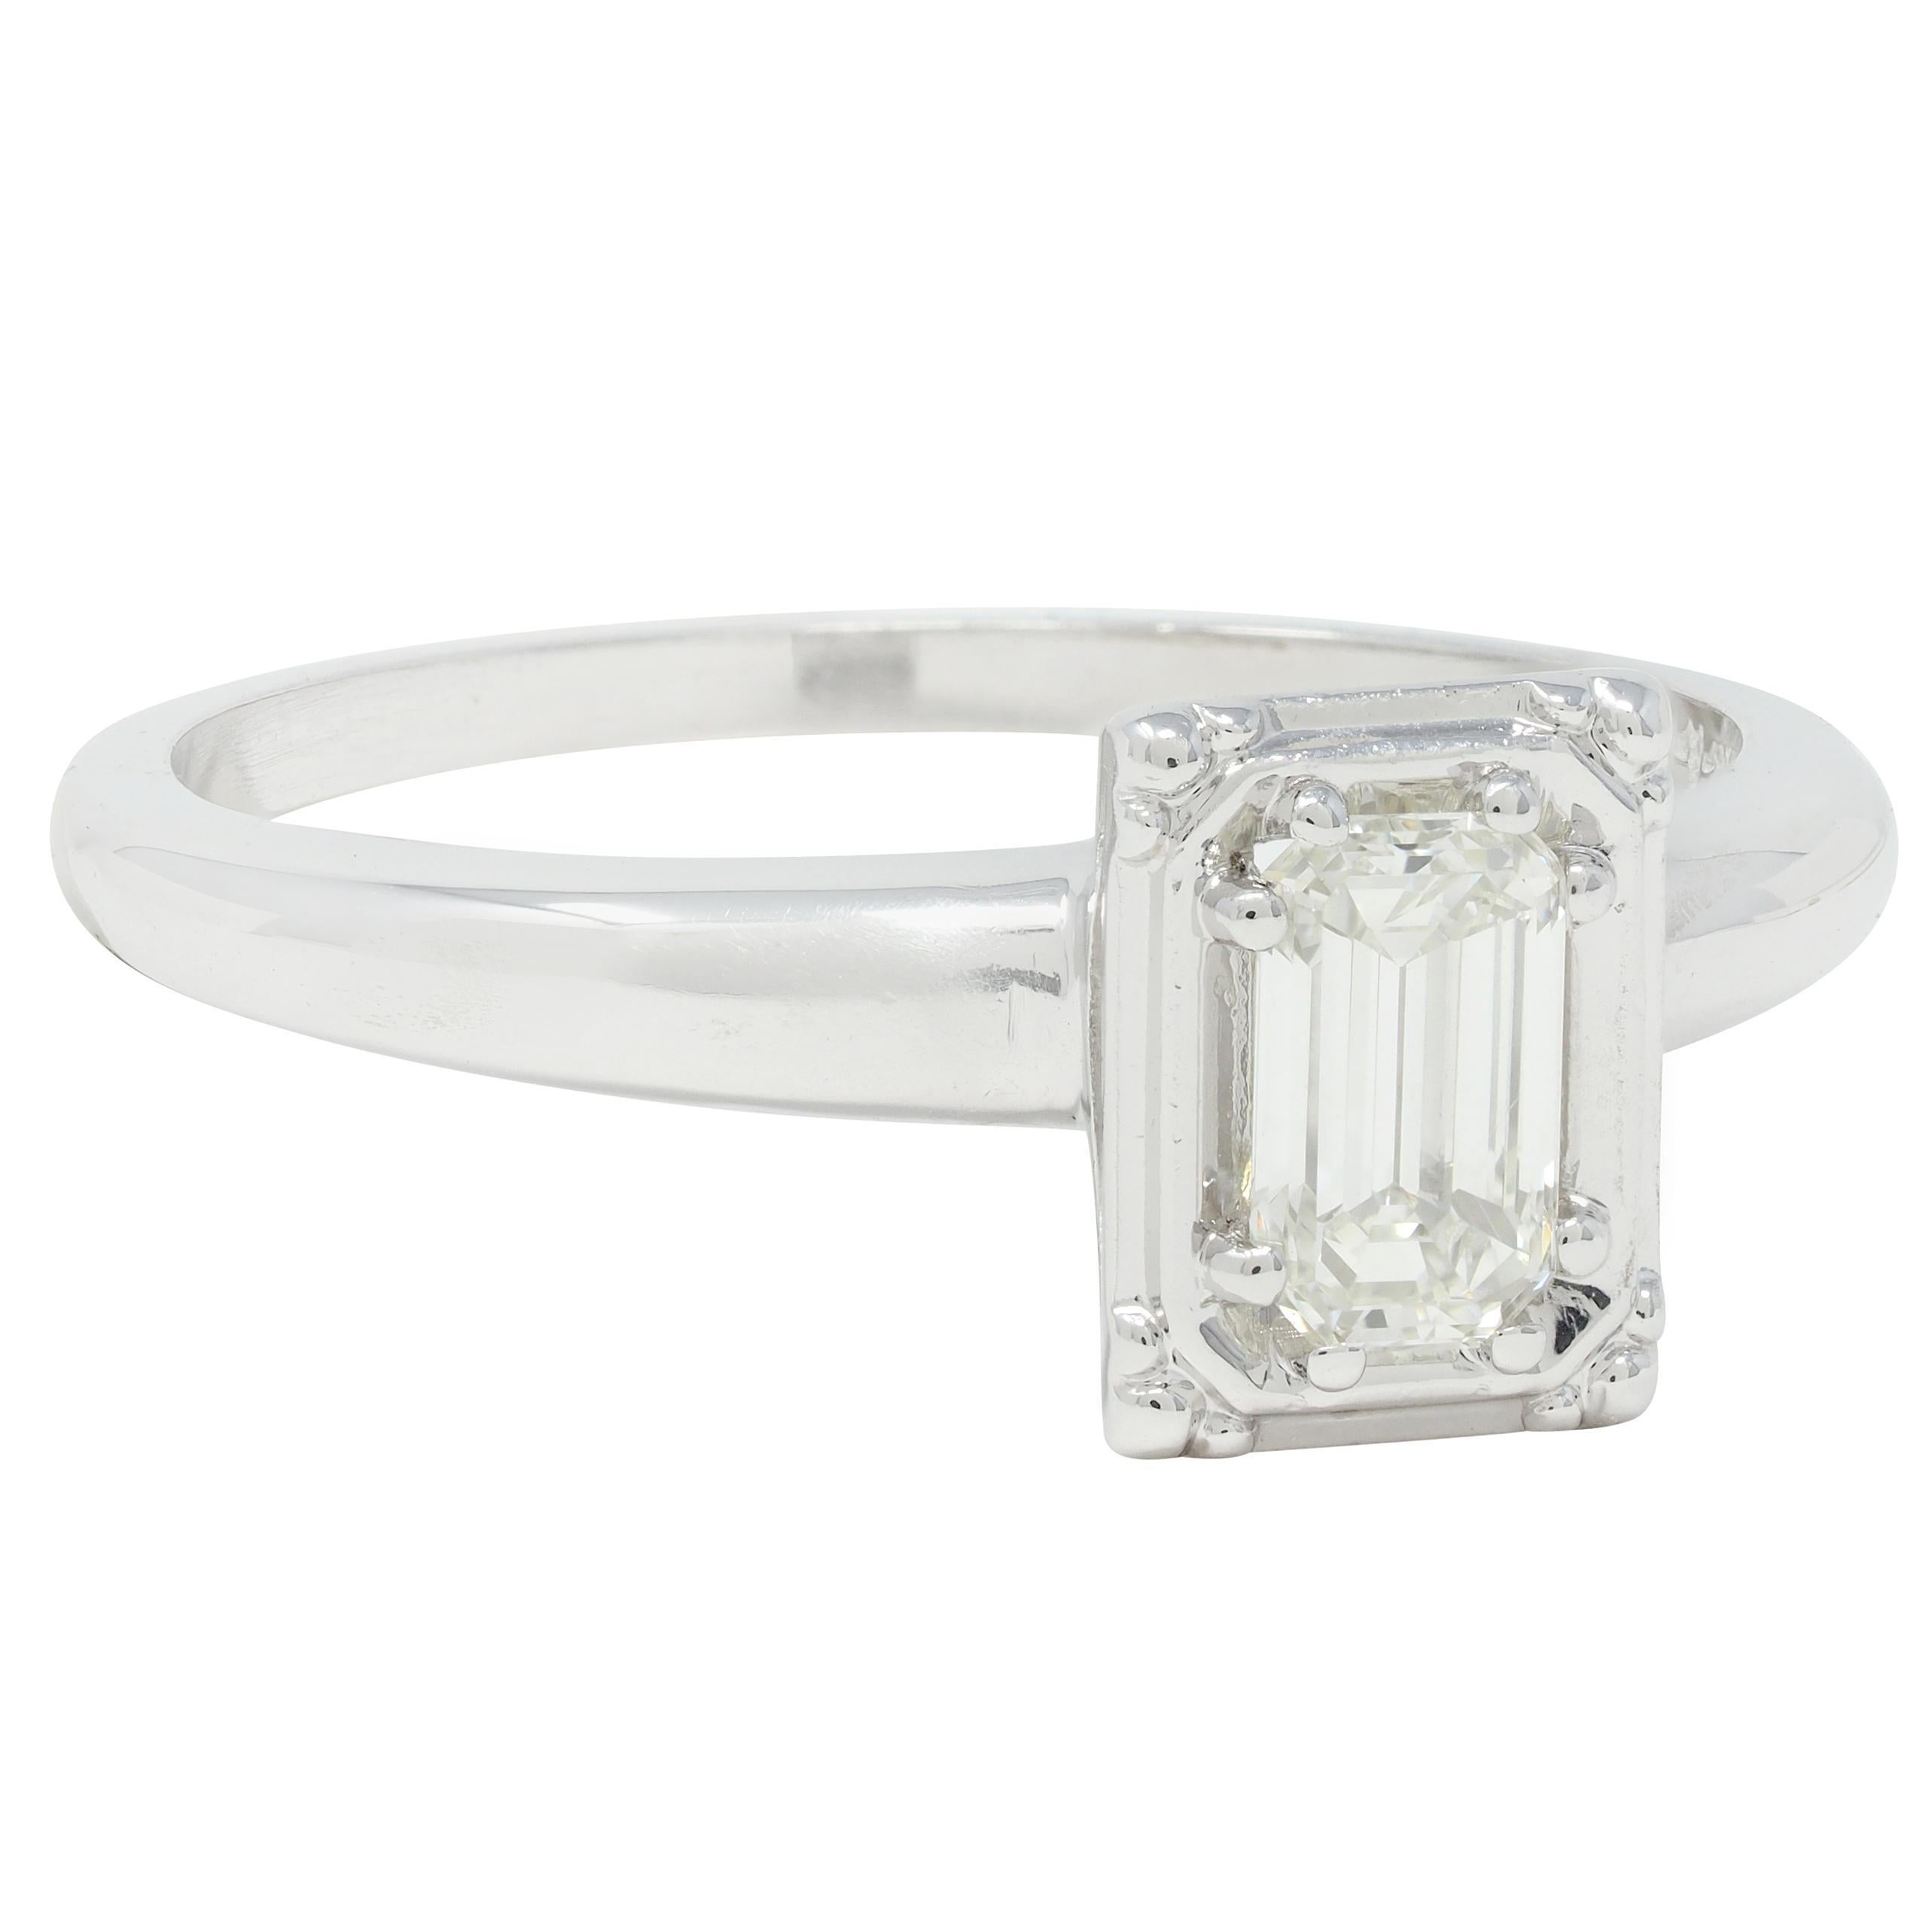 Centering an emerald cut diamond weighing approximately 0.40 carat total - J color with VS2 clarity
Bead set in an octagonal form head with a pierced arch motif basket
Completed by tapered shank with high polish finish
Stamped for 14 karat